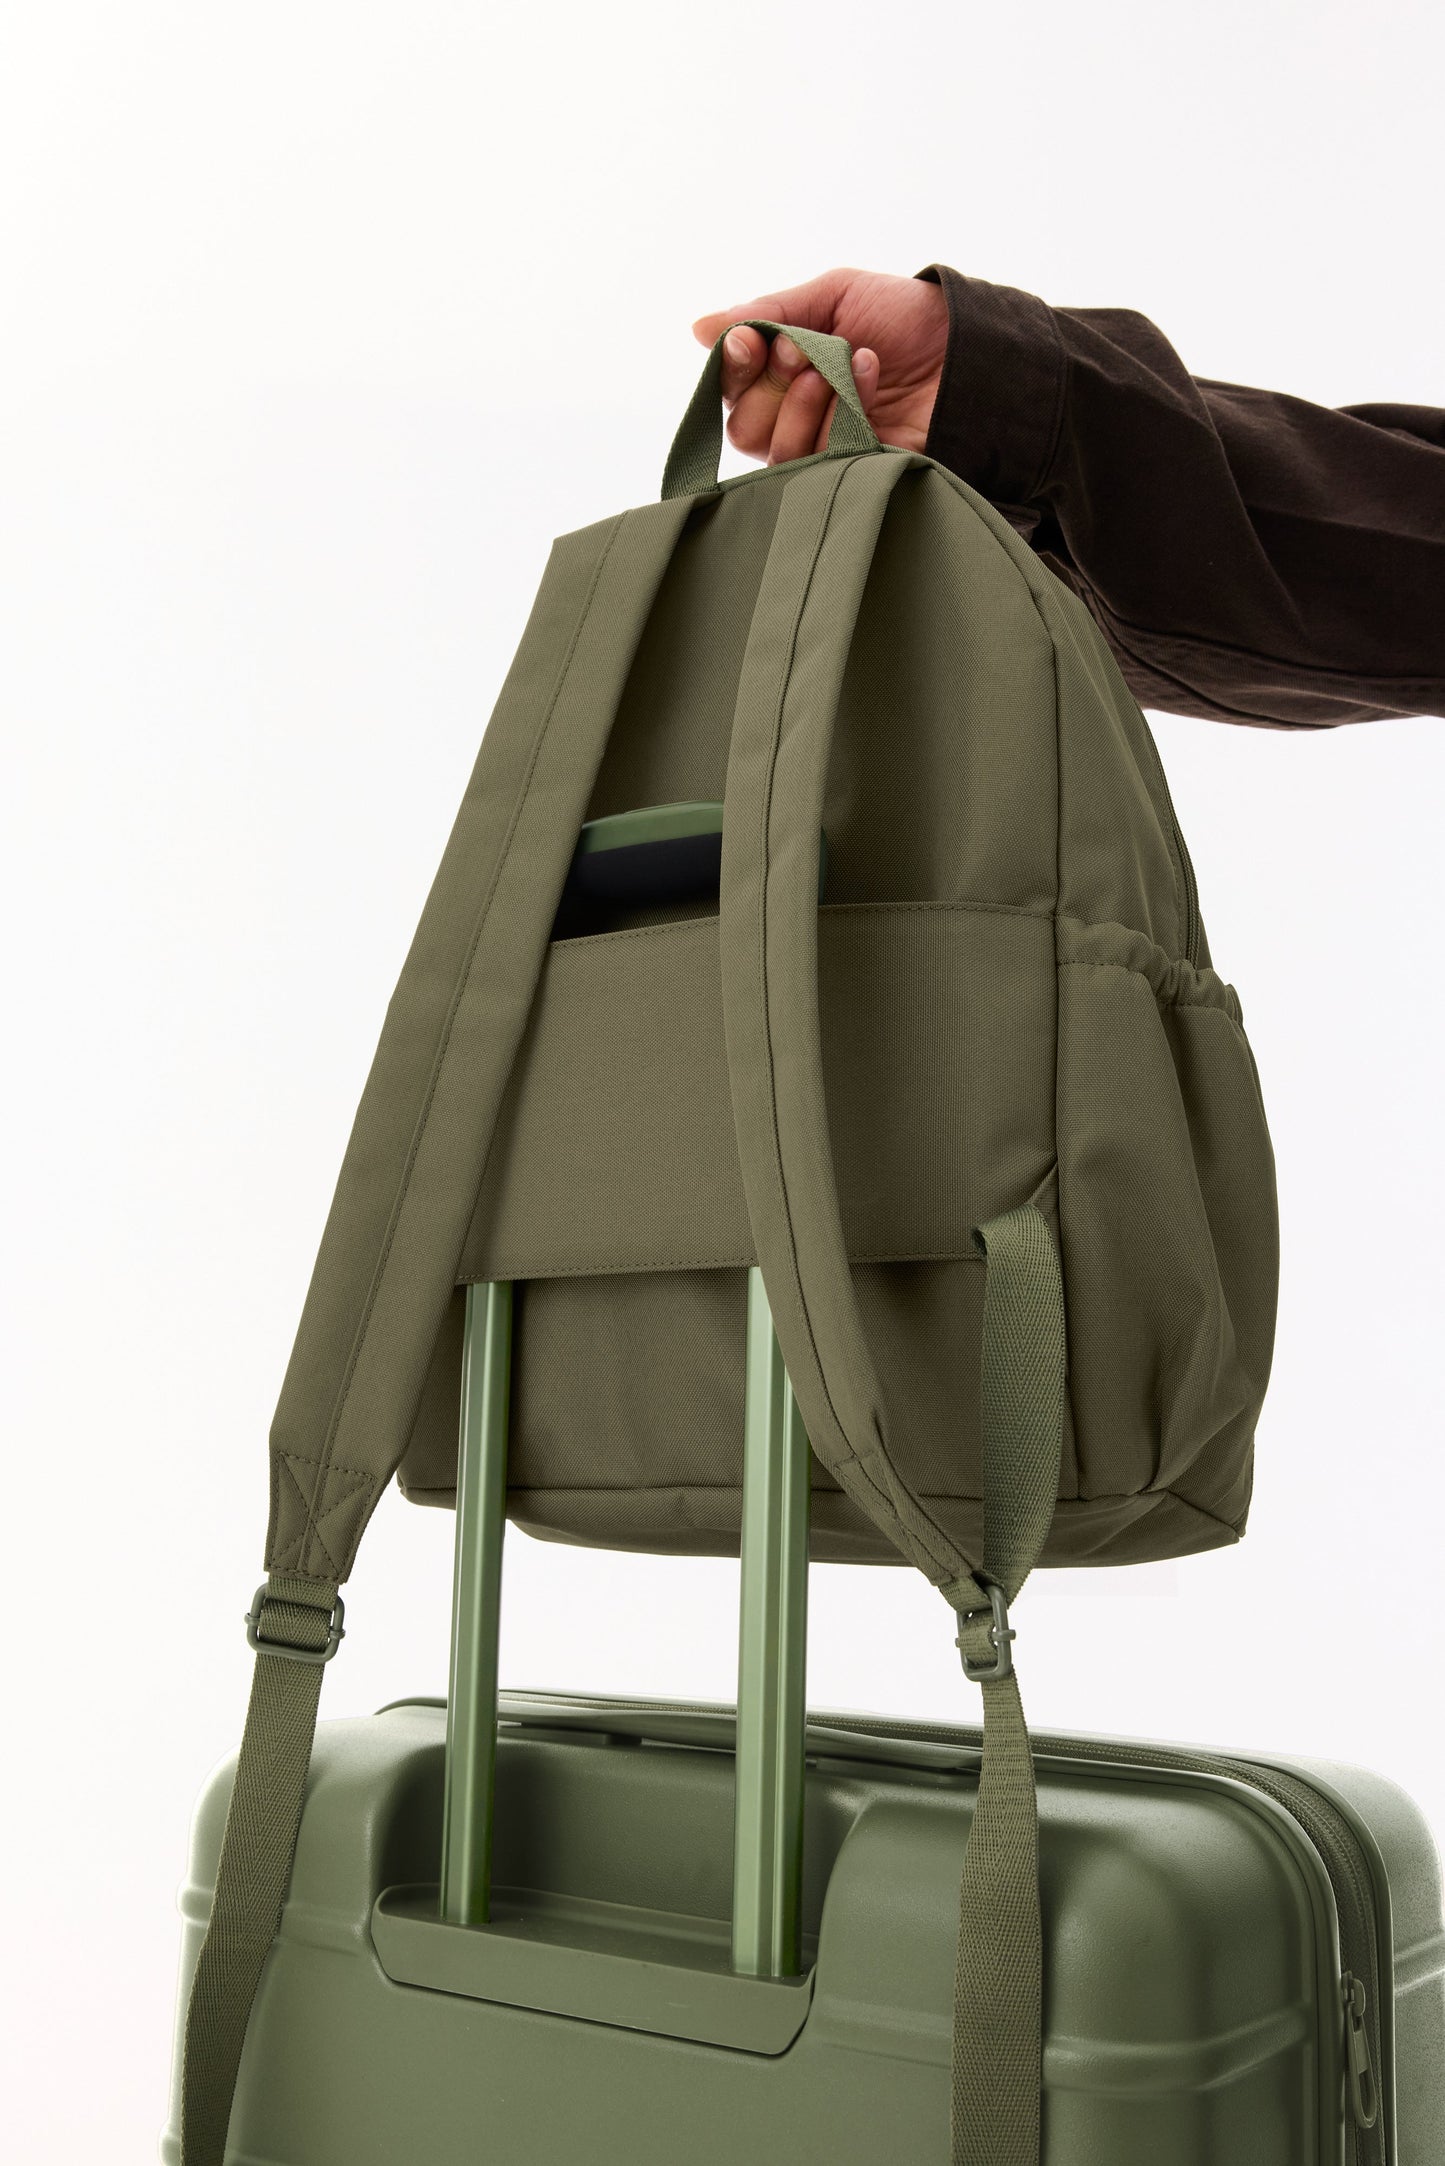 The BÉISics Backpack in Olive